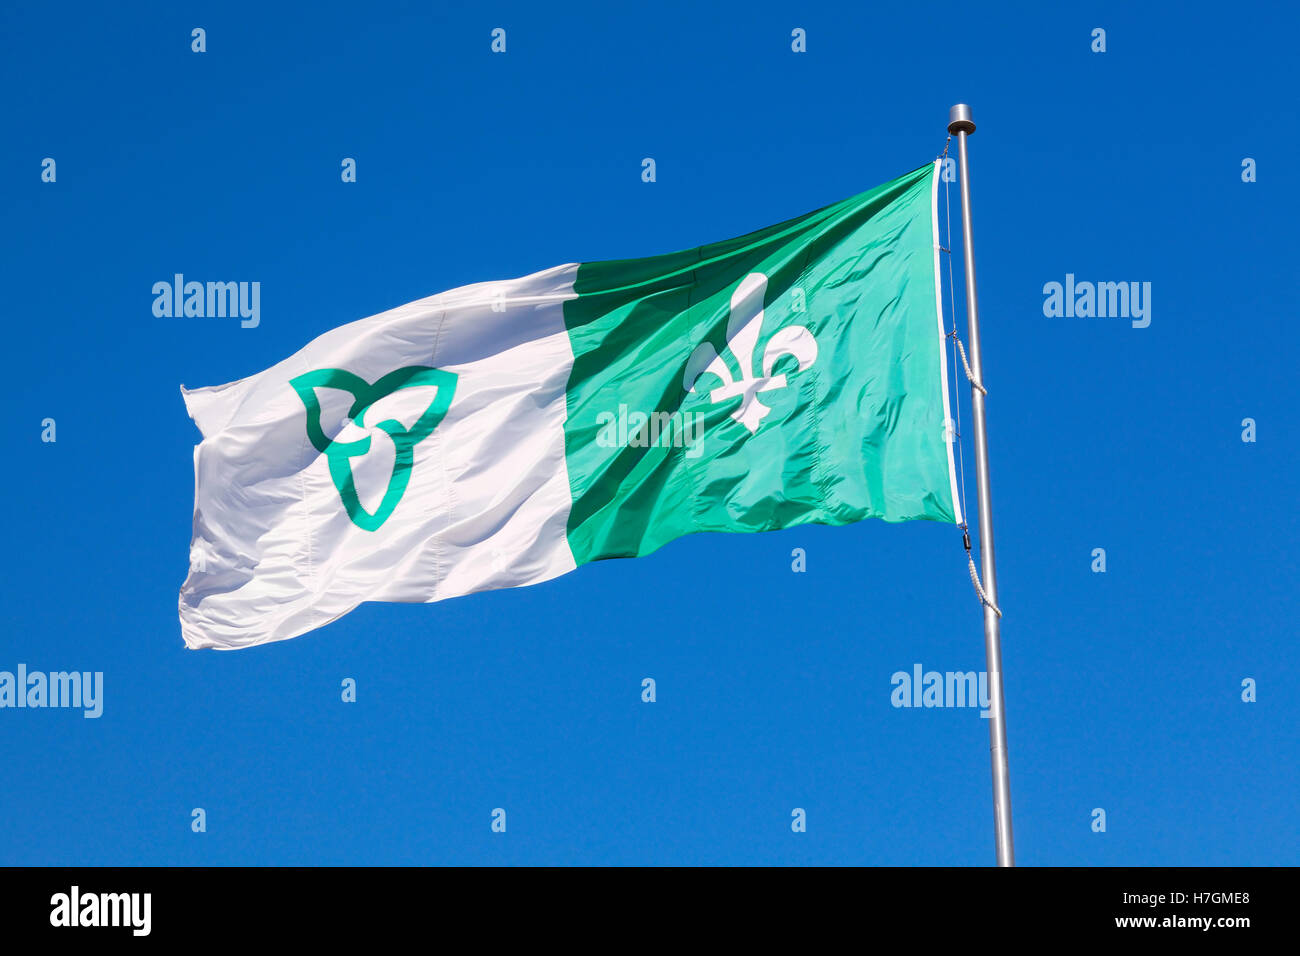 A flag with the Ontario and Québec logos in front of a blue sky in Hawkesbury, Ontario, Canada. Stock Photo